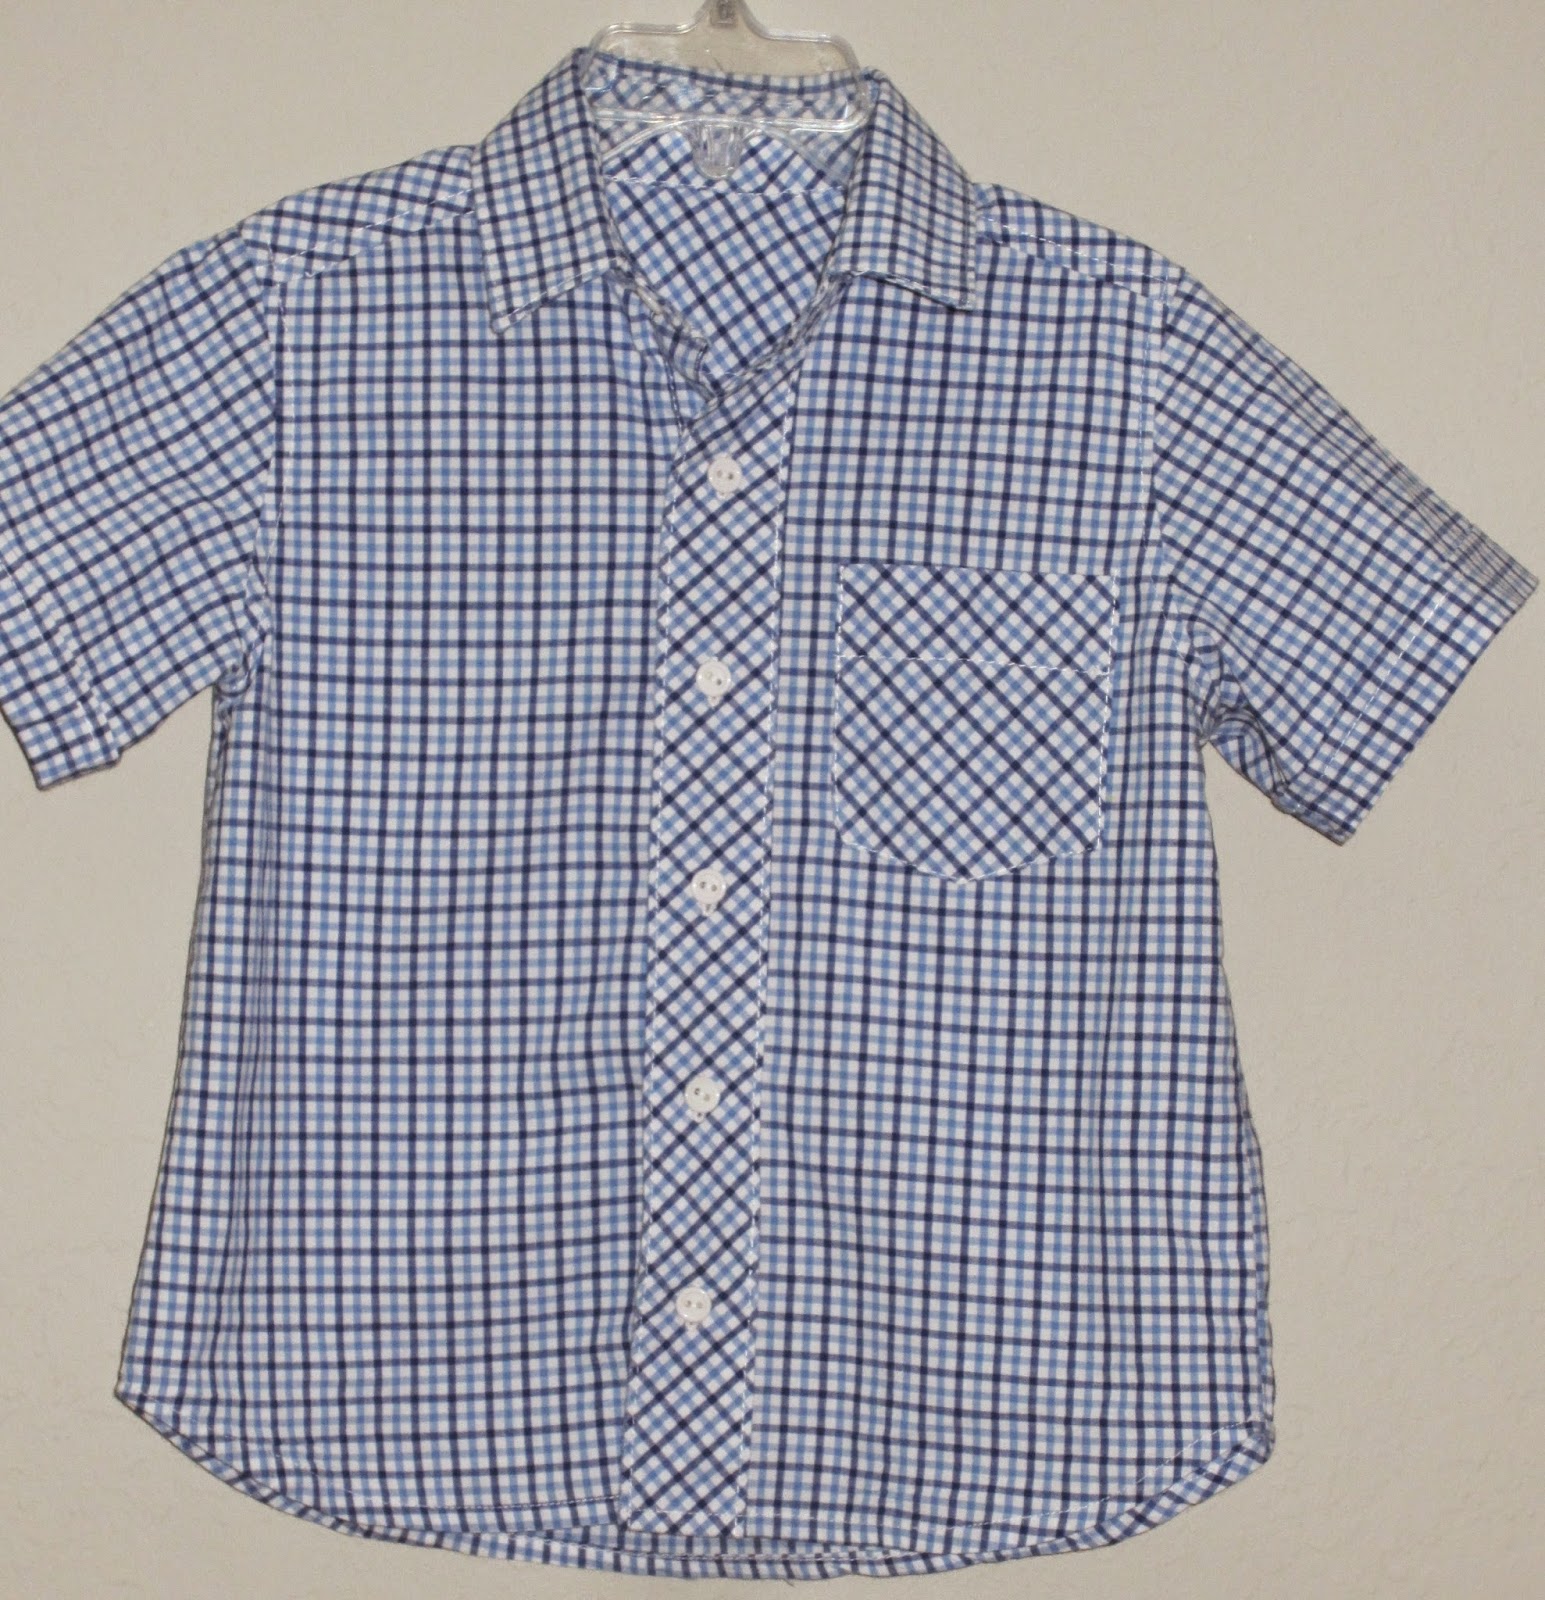 Sewing is so FUN: boys shirt with collar with stand